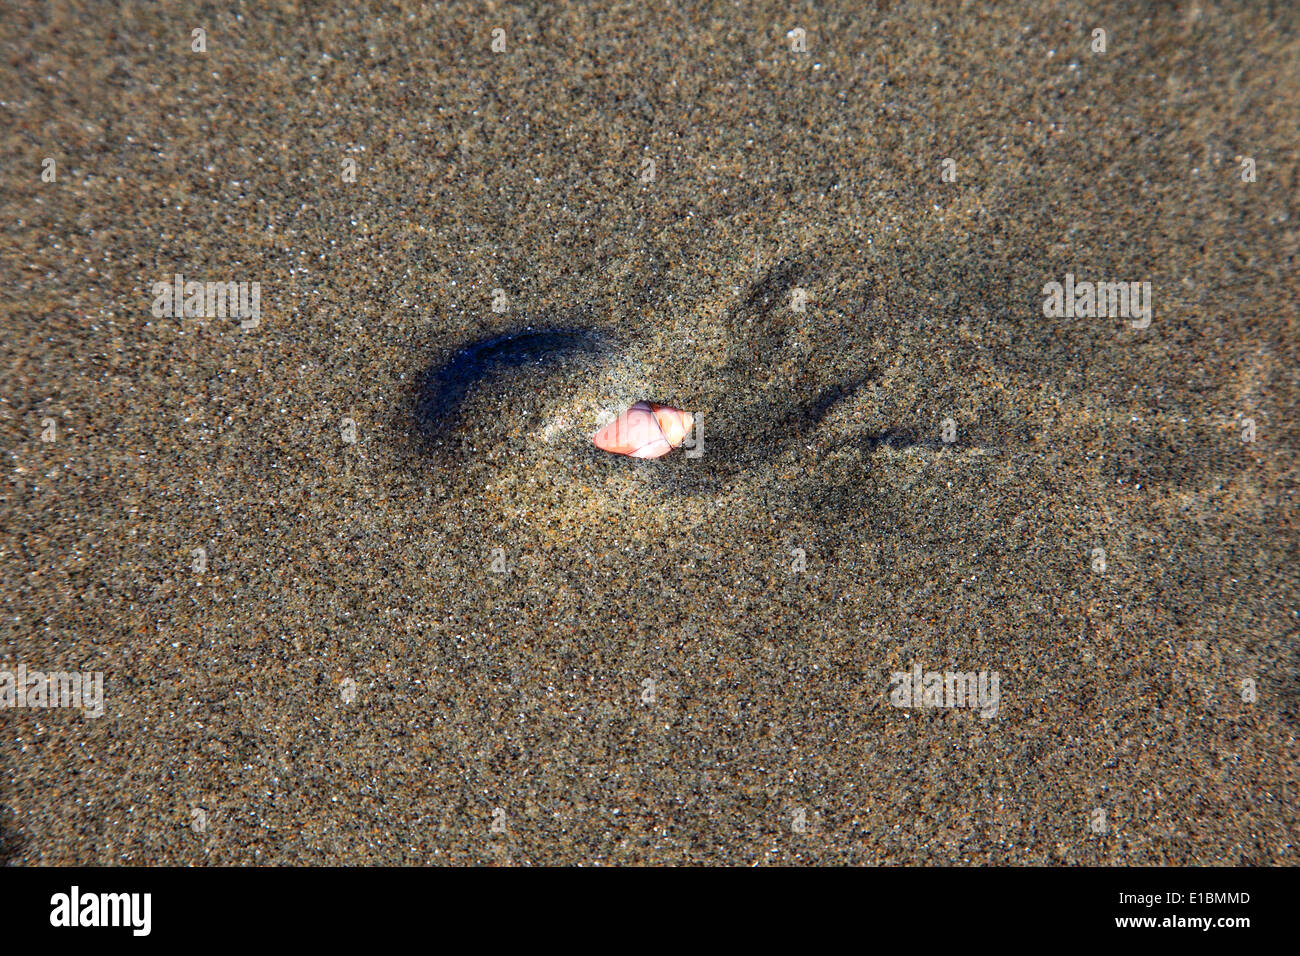 snail digging deeper into the sand at low tide Stock Photo